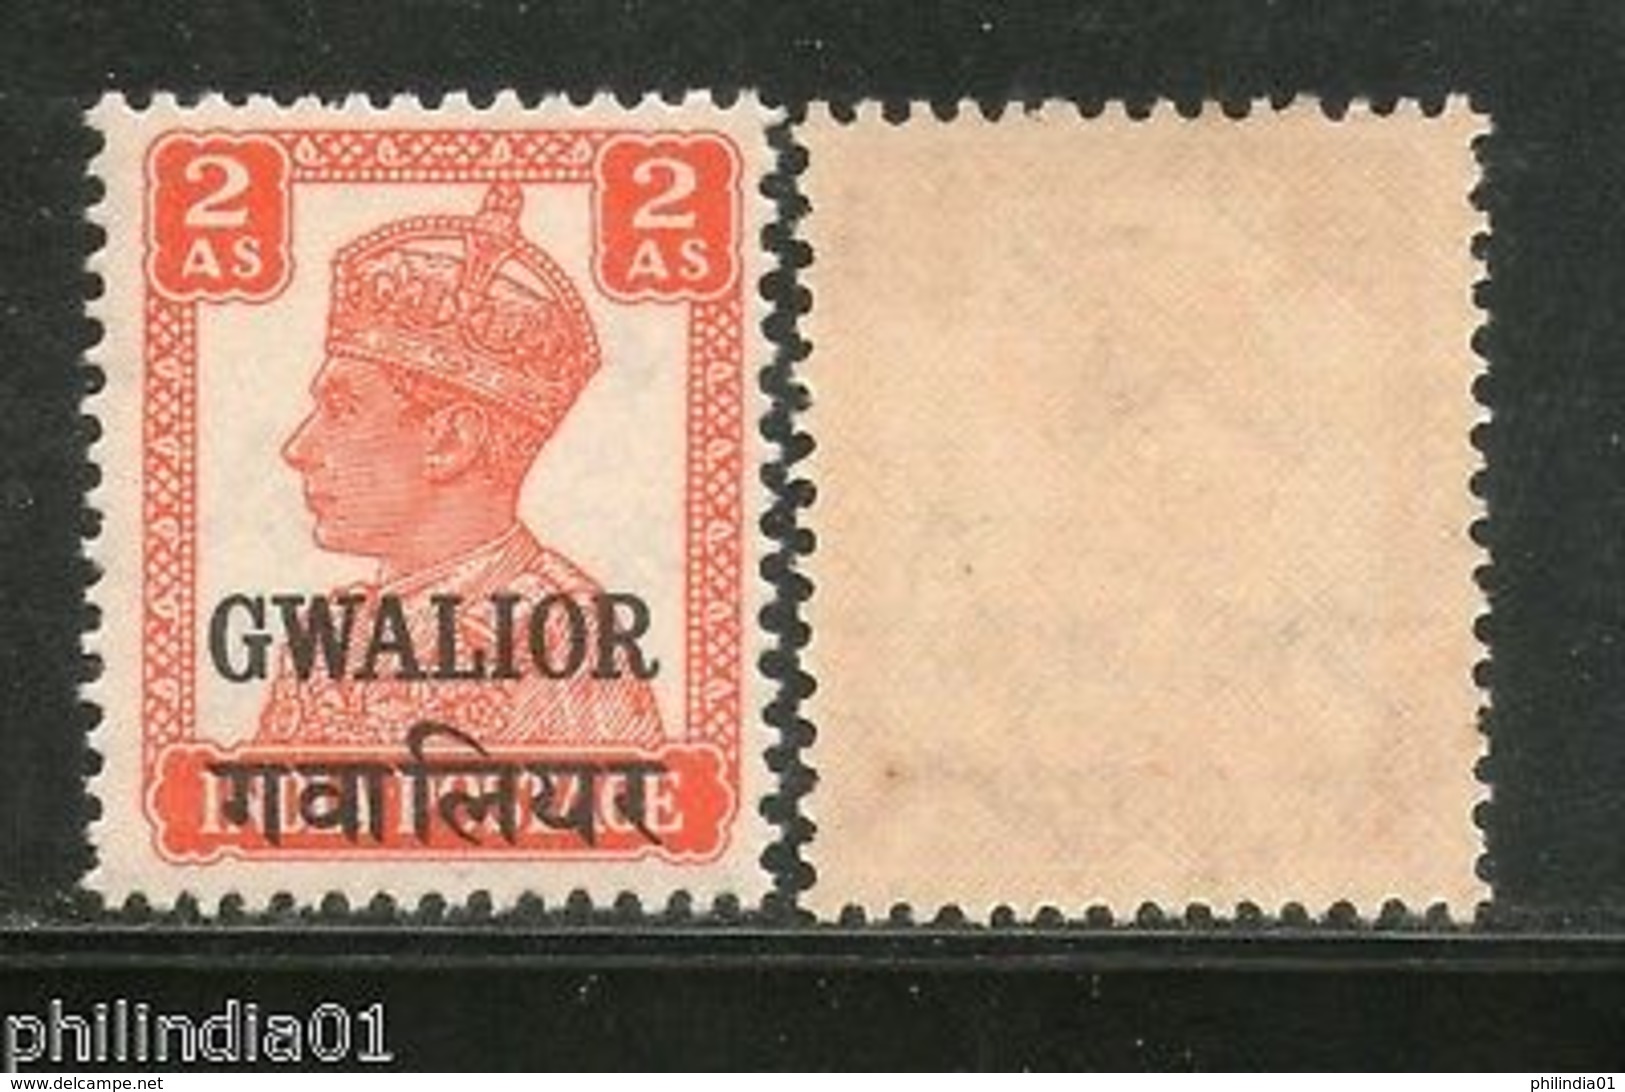 India Gwalior State KG VI 2As Postage Stamp SG 123 / Sc 105 Cat �3 MNH - Gwalior